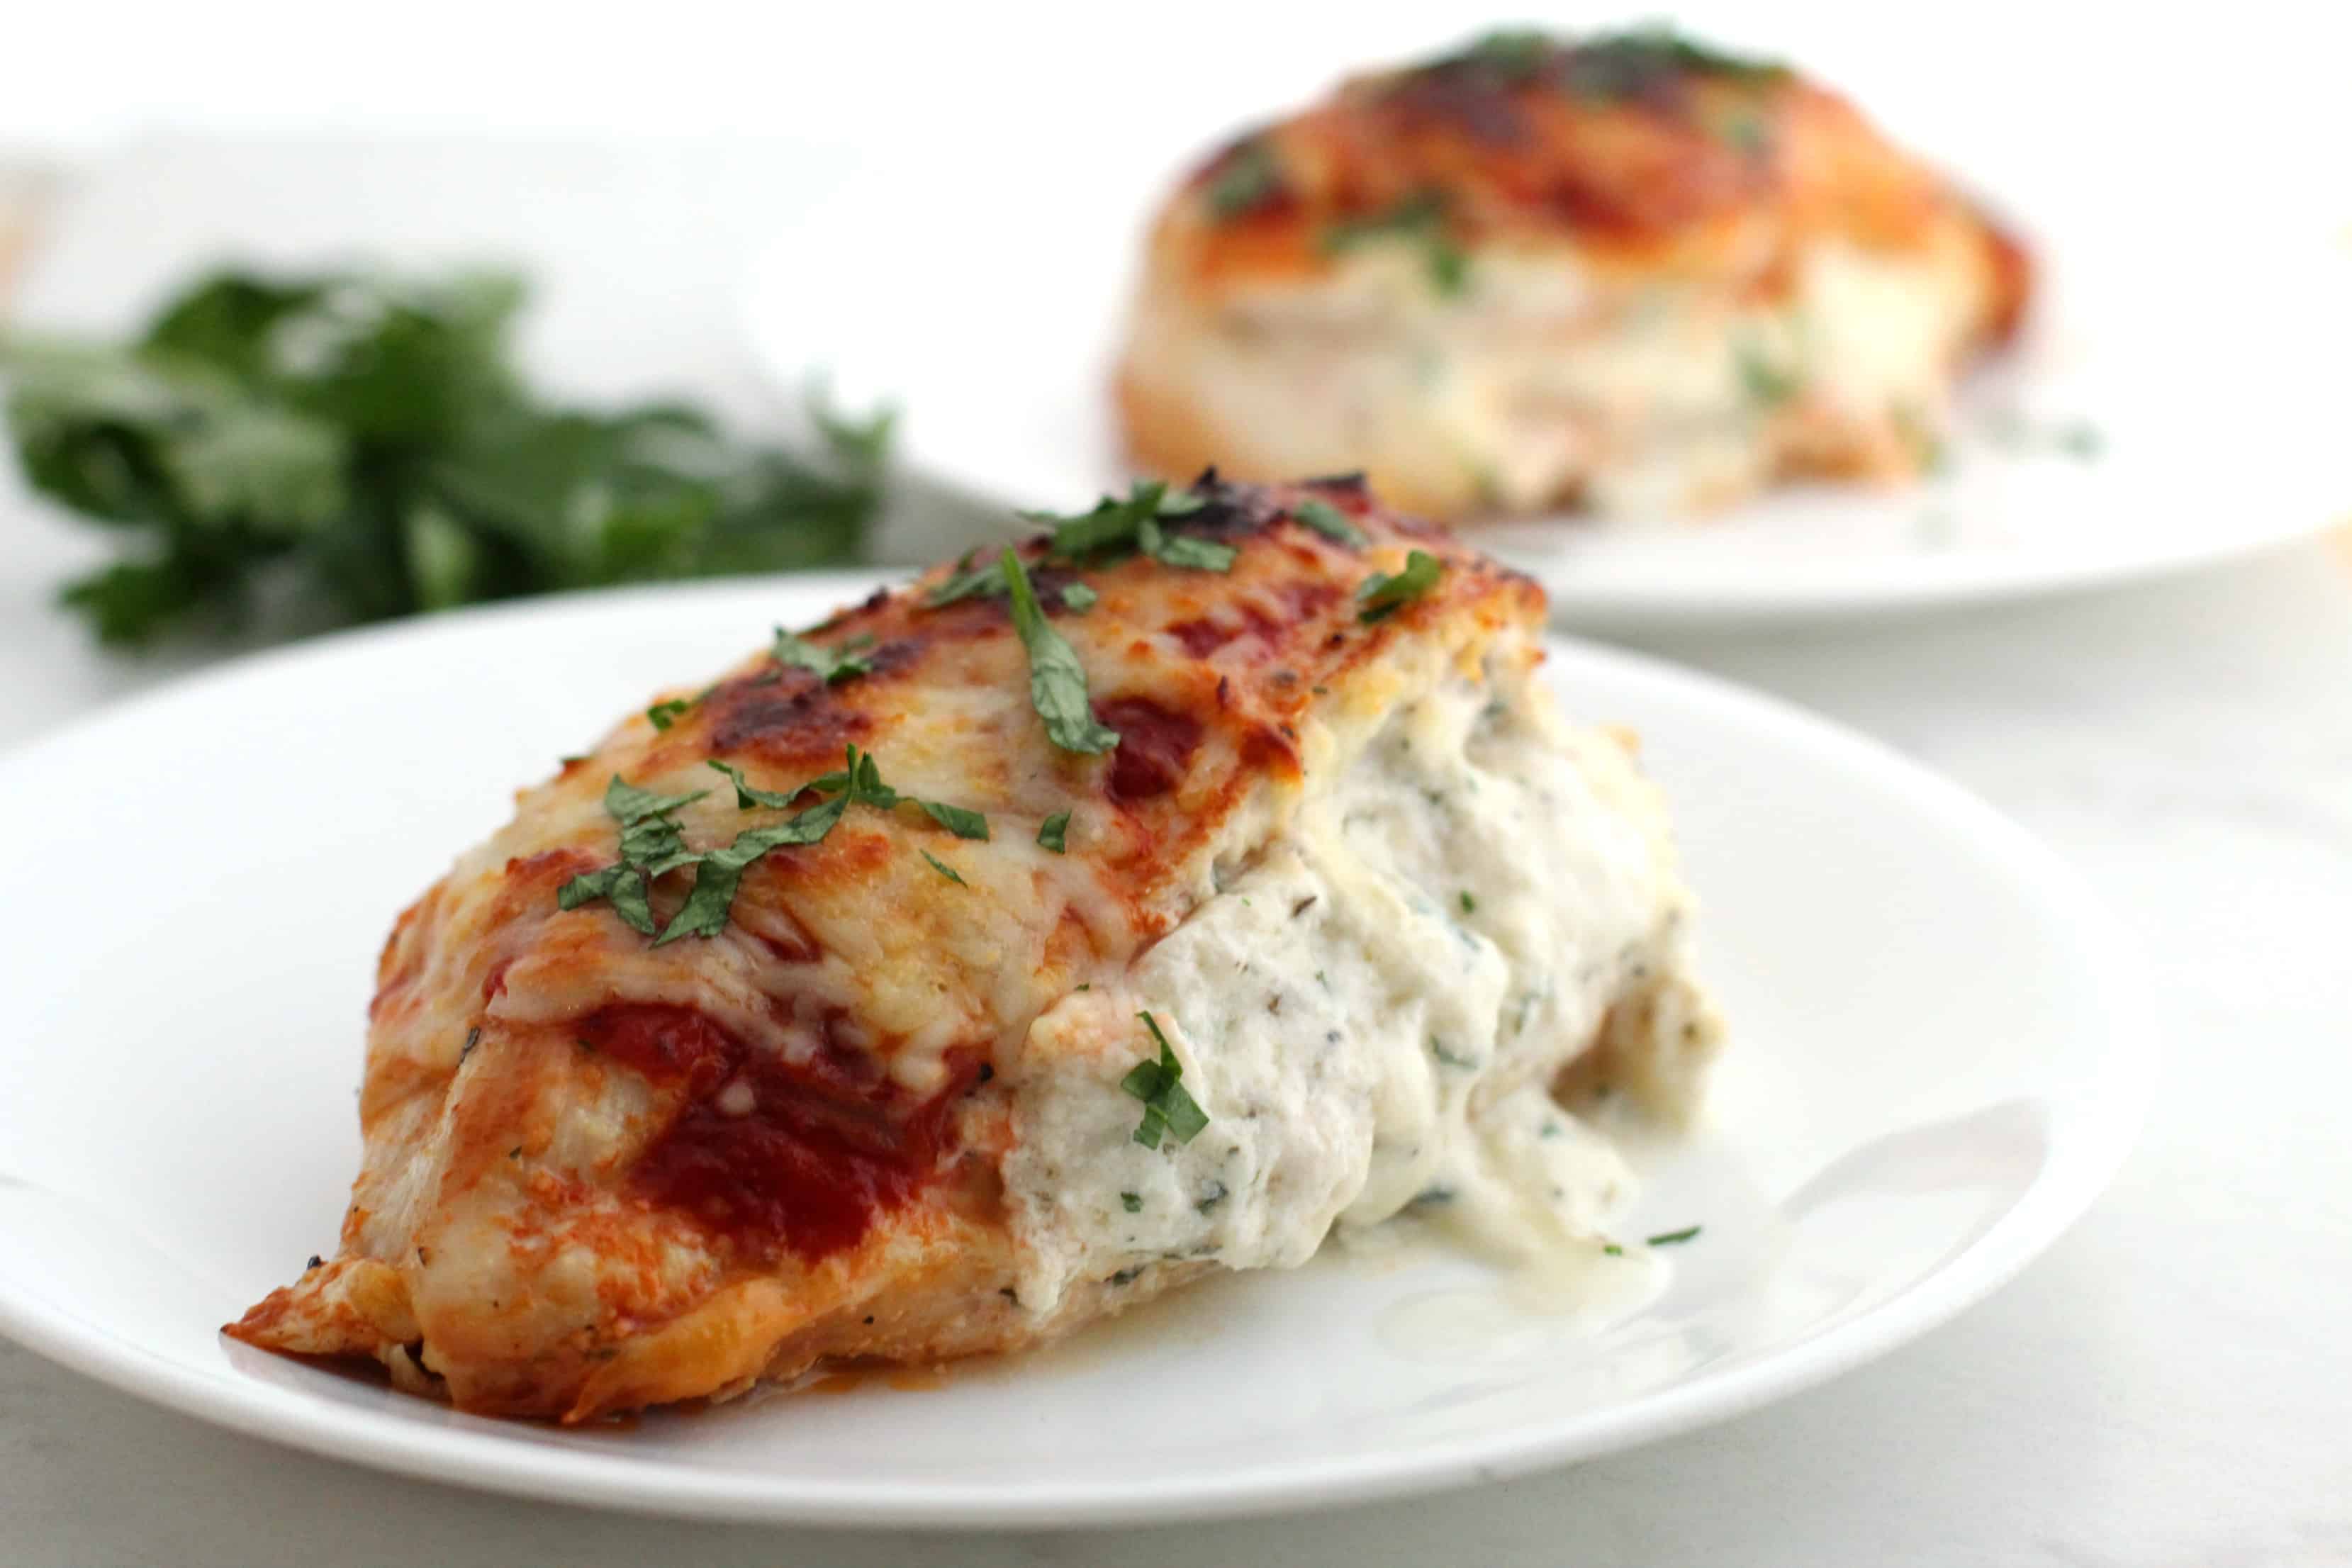 Low Carb Lasagna Stuffed Chicken- and Much Needed Parental Advice